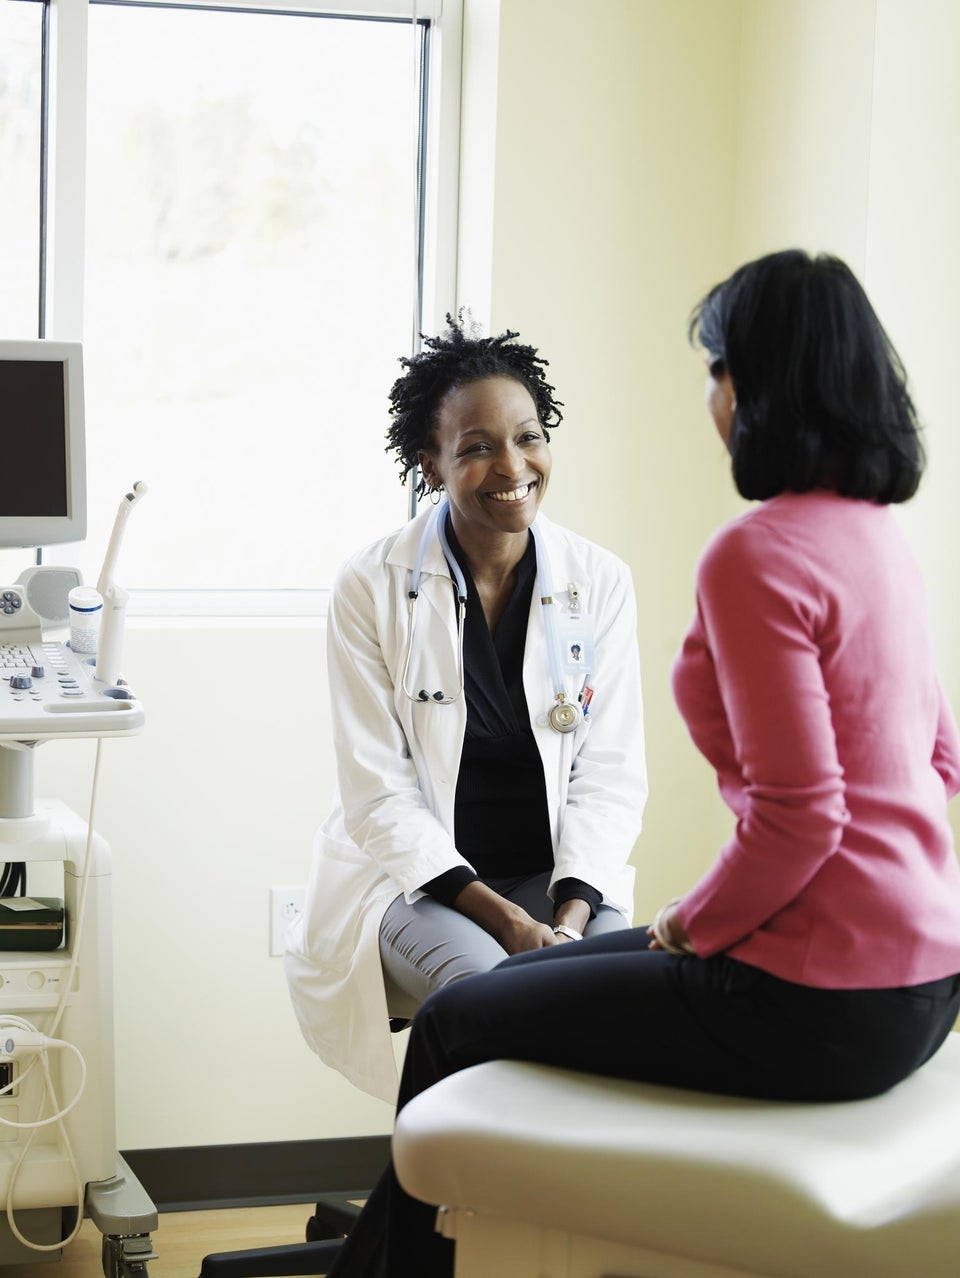 Black and Female Doctors Earn Less than White Male Doctors, Study Shows